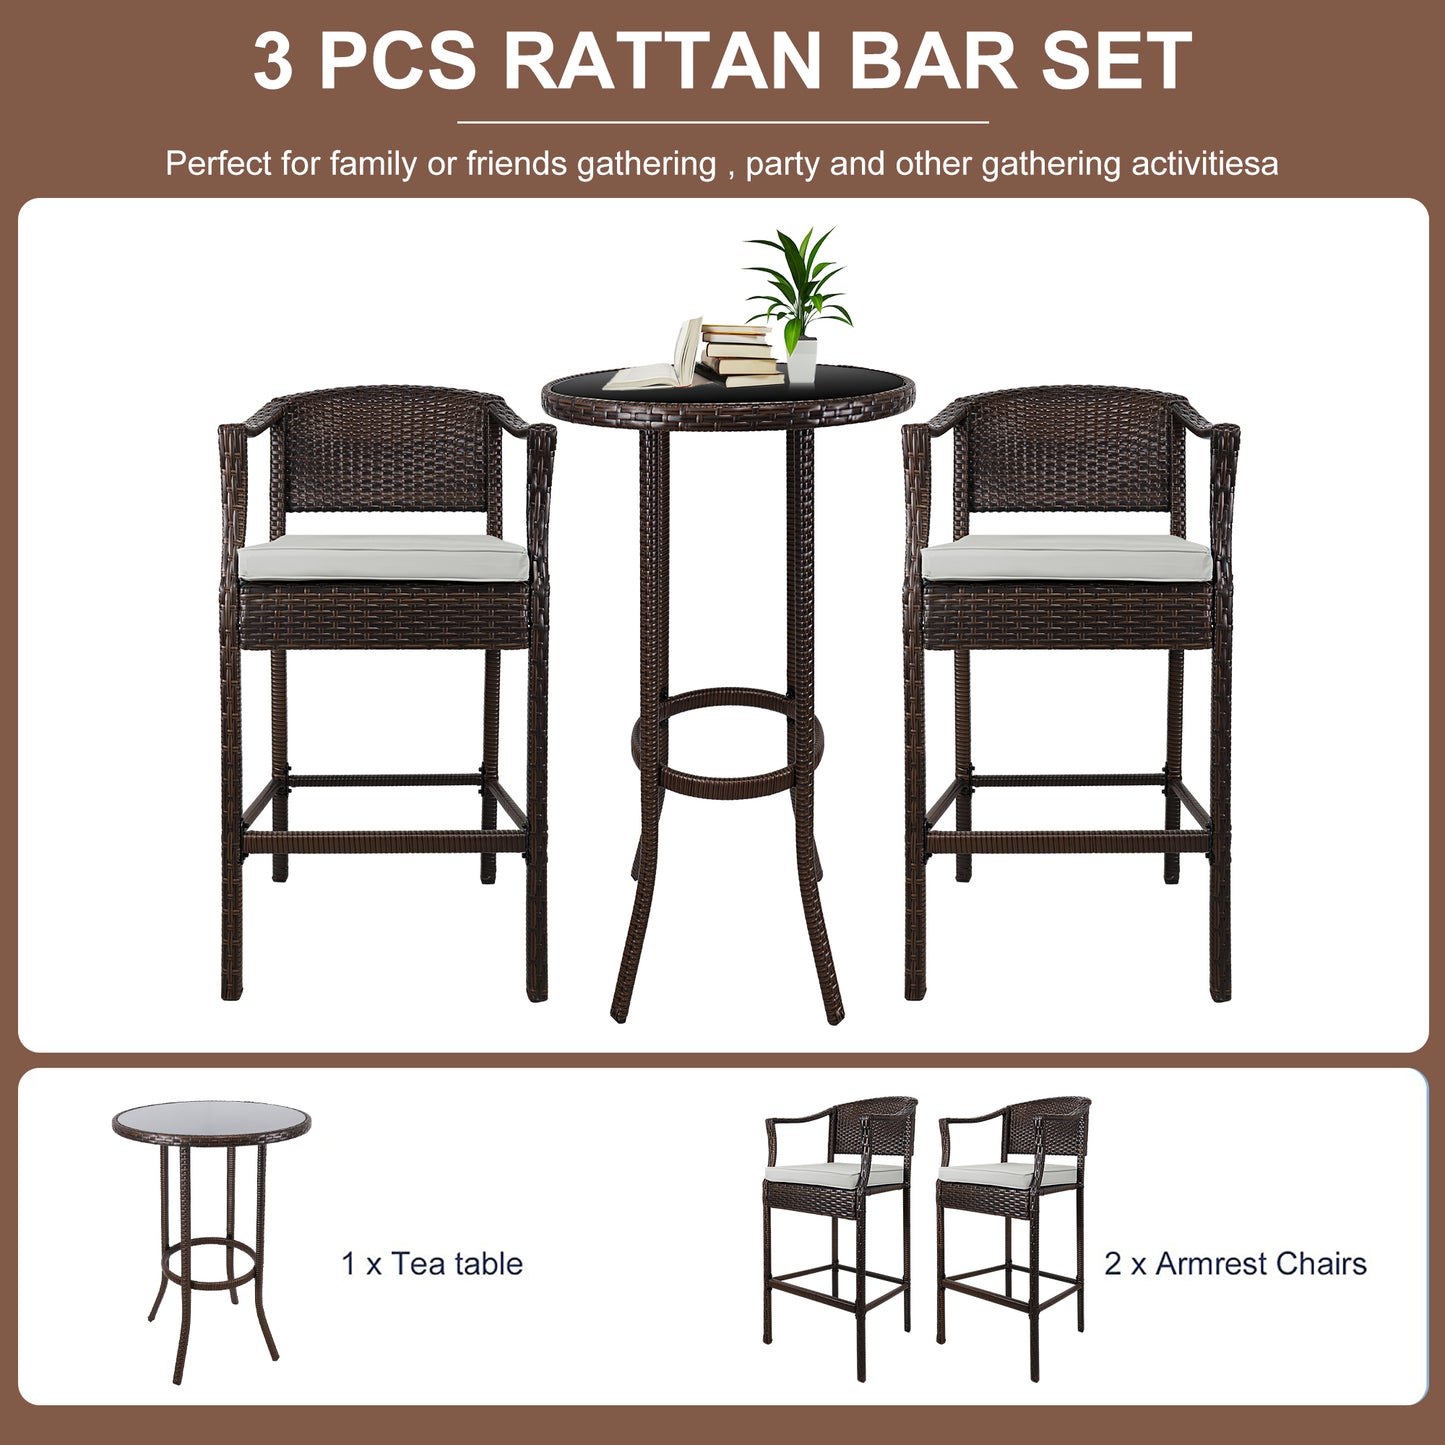 Clearance! 3 Piece Pub Table Set, High Top Bar Table W/ 2 Chairs Padded Seat, PE Rattan Height Bar Stools Set of 3, All-Weather Dining Table Set for Kitchen Home Pub Cafe Outdoor Patio Poolside, B101